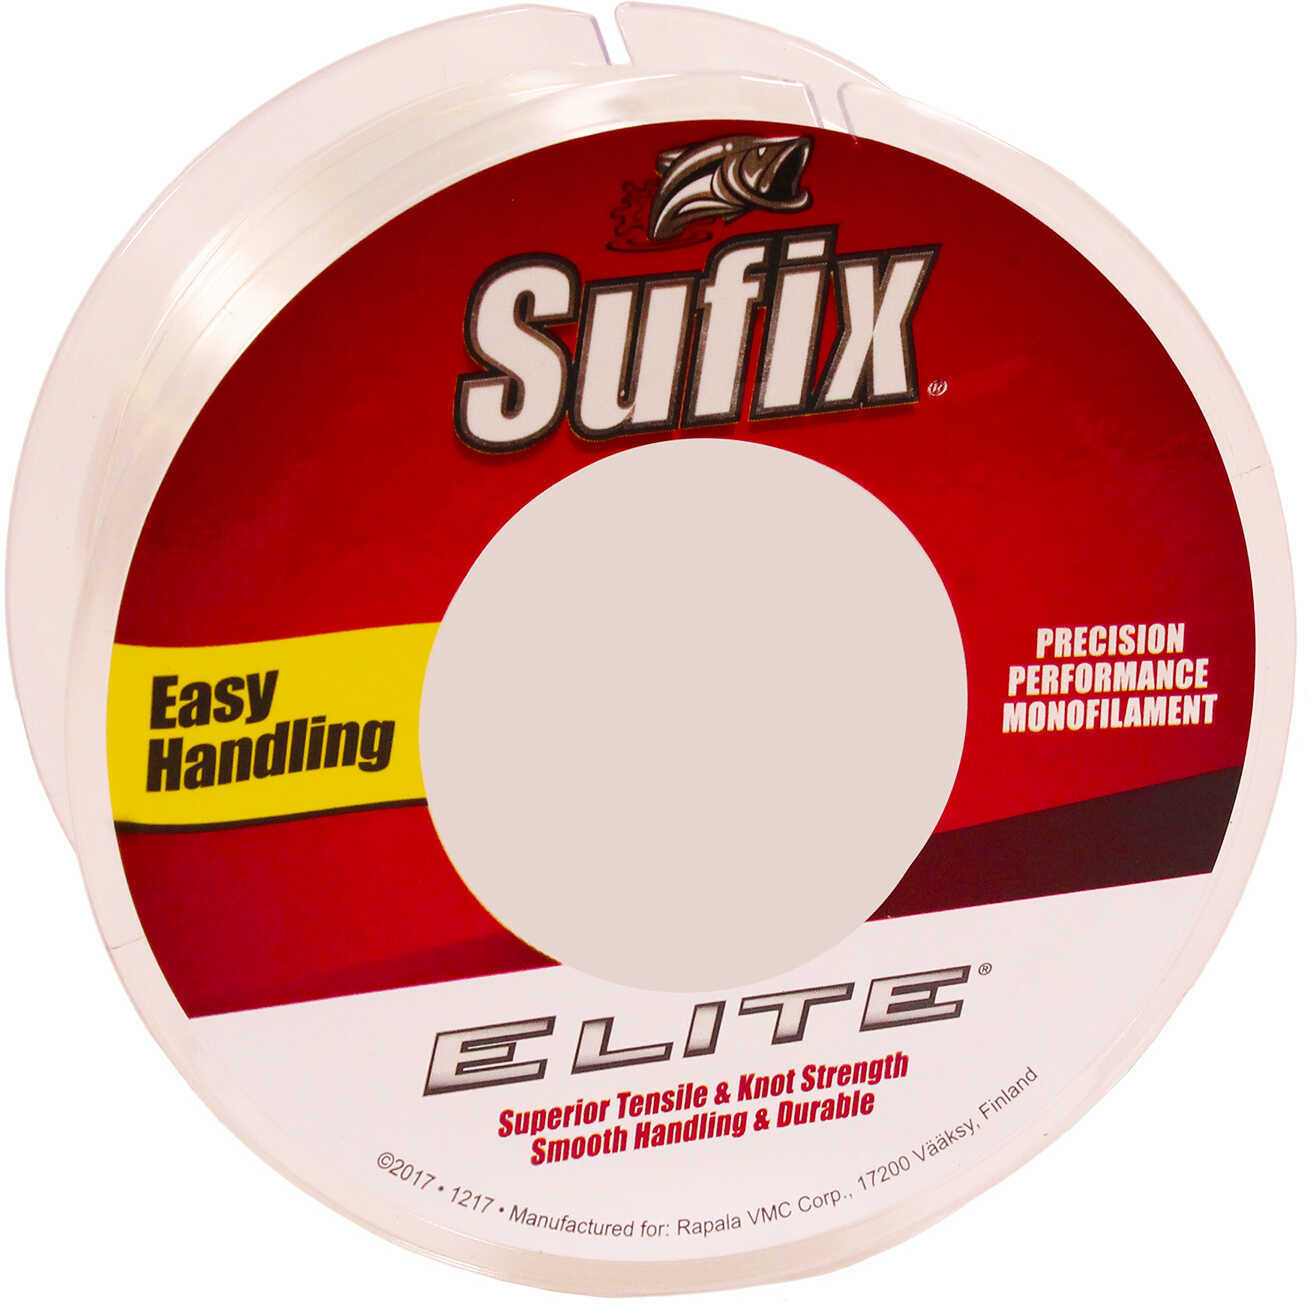 Sufix Elite Line 330Yd 8# Clear Md#: 661-108